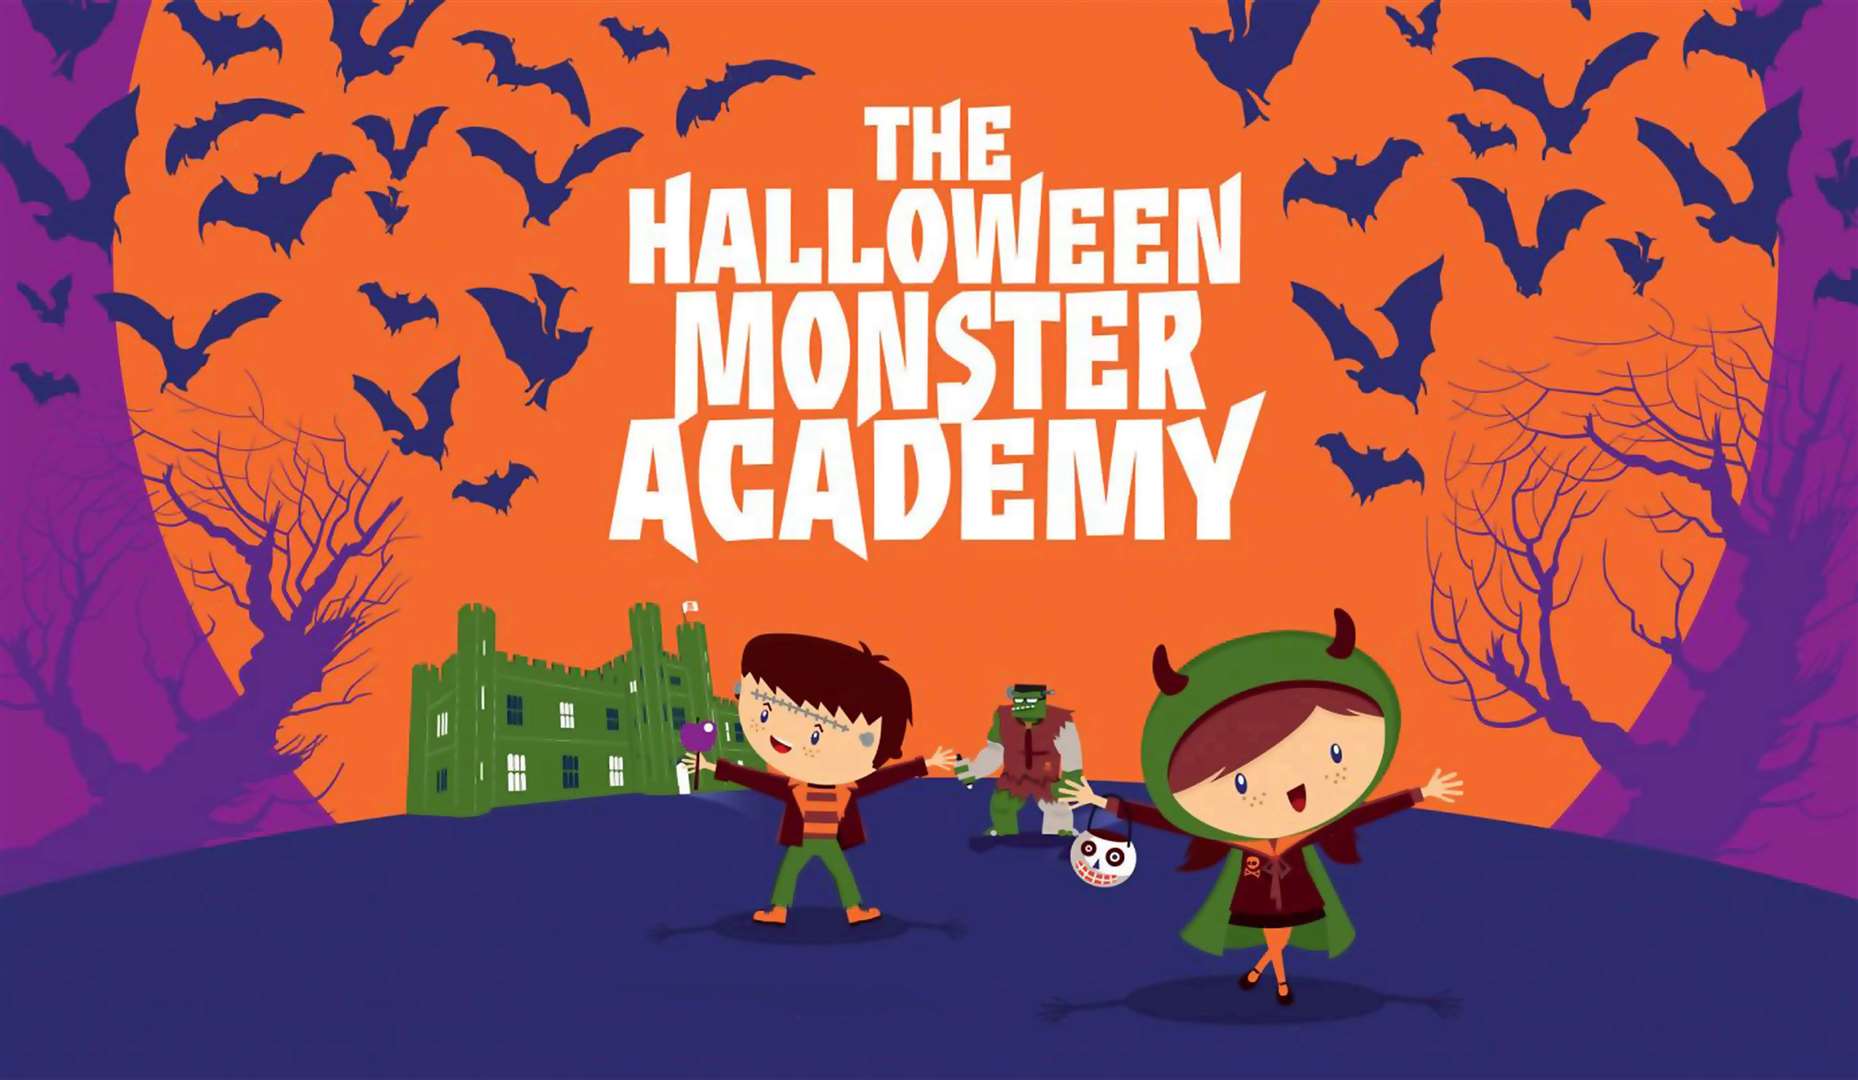 Take your kids to the Monster Academy